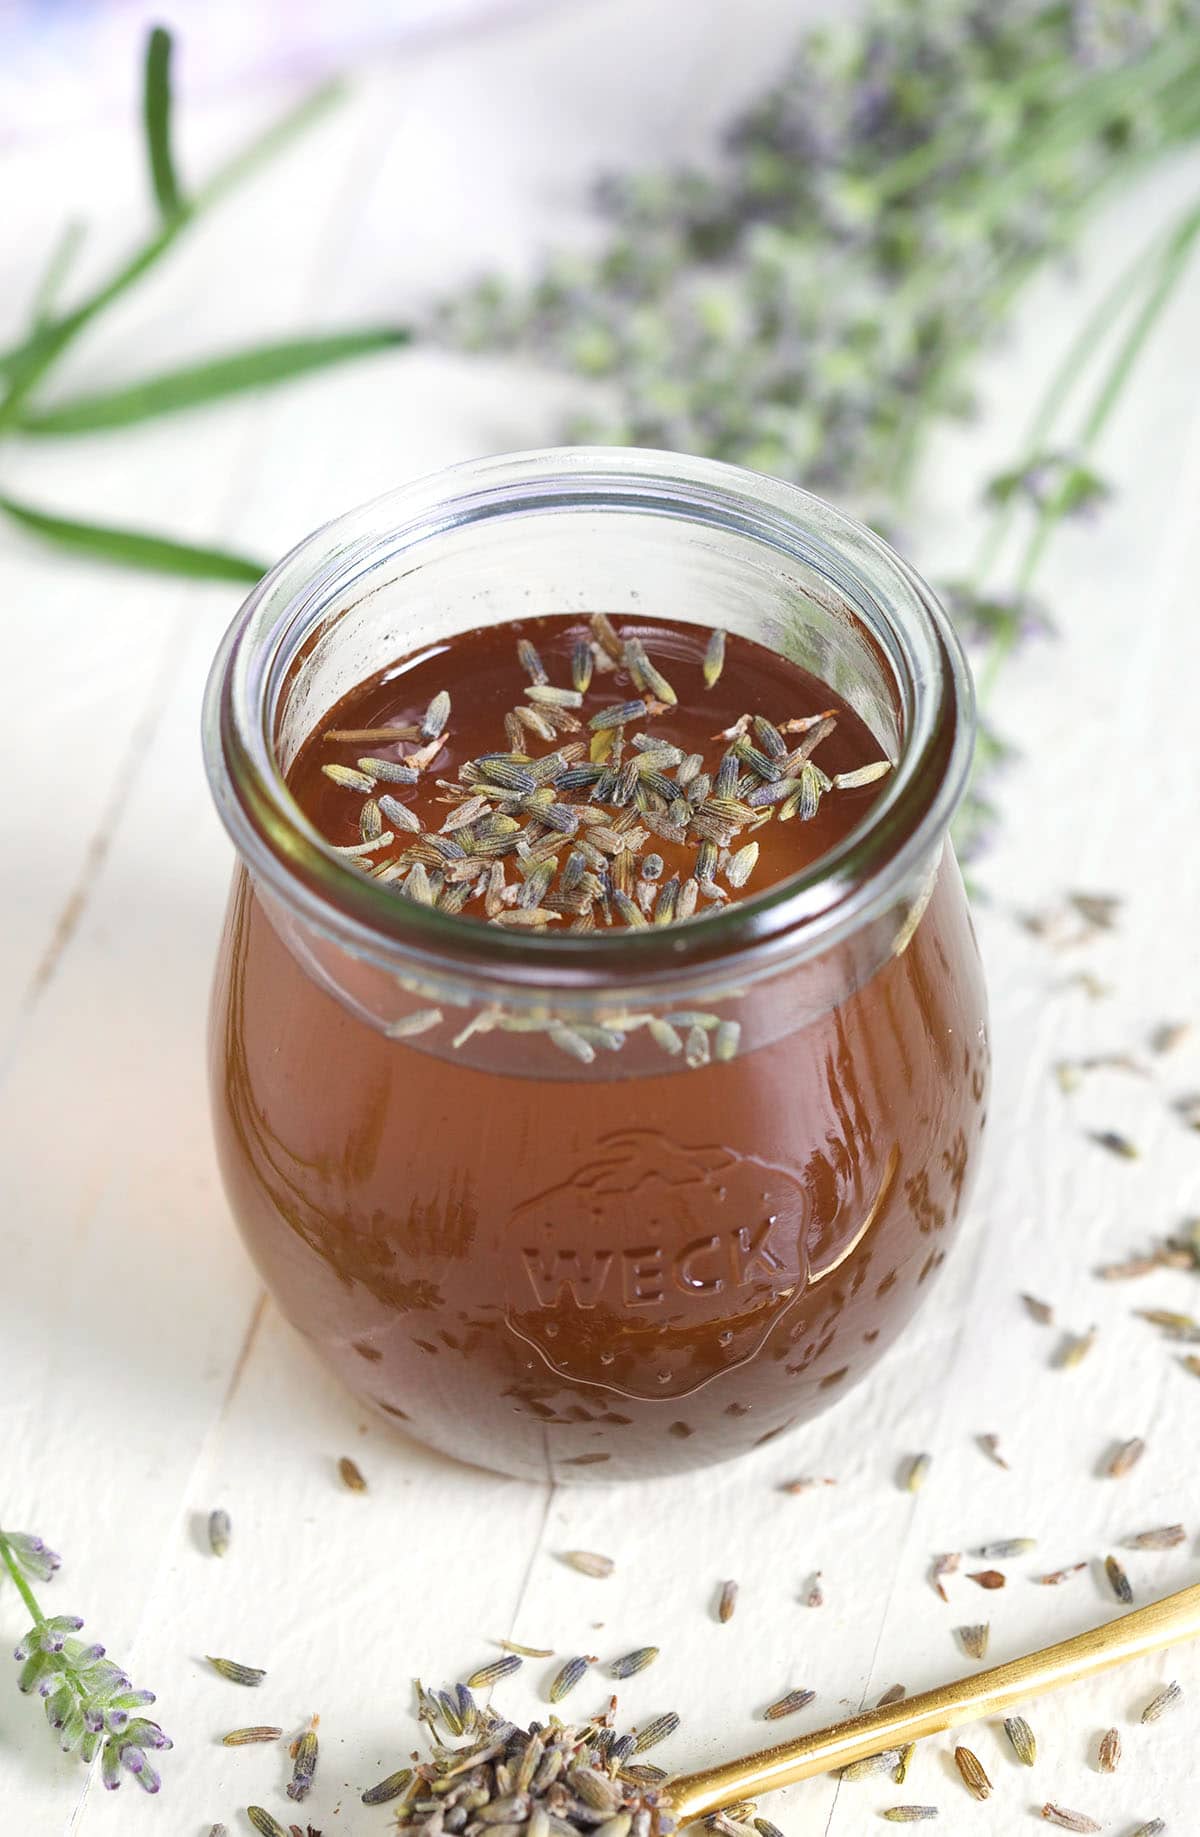 A small glass jar of simple syrup is placed on a white surface with lavender surrounding it.